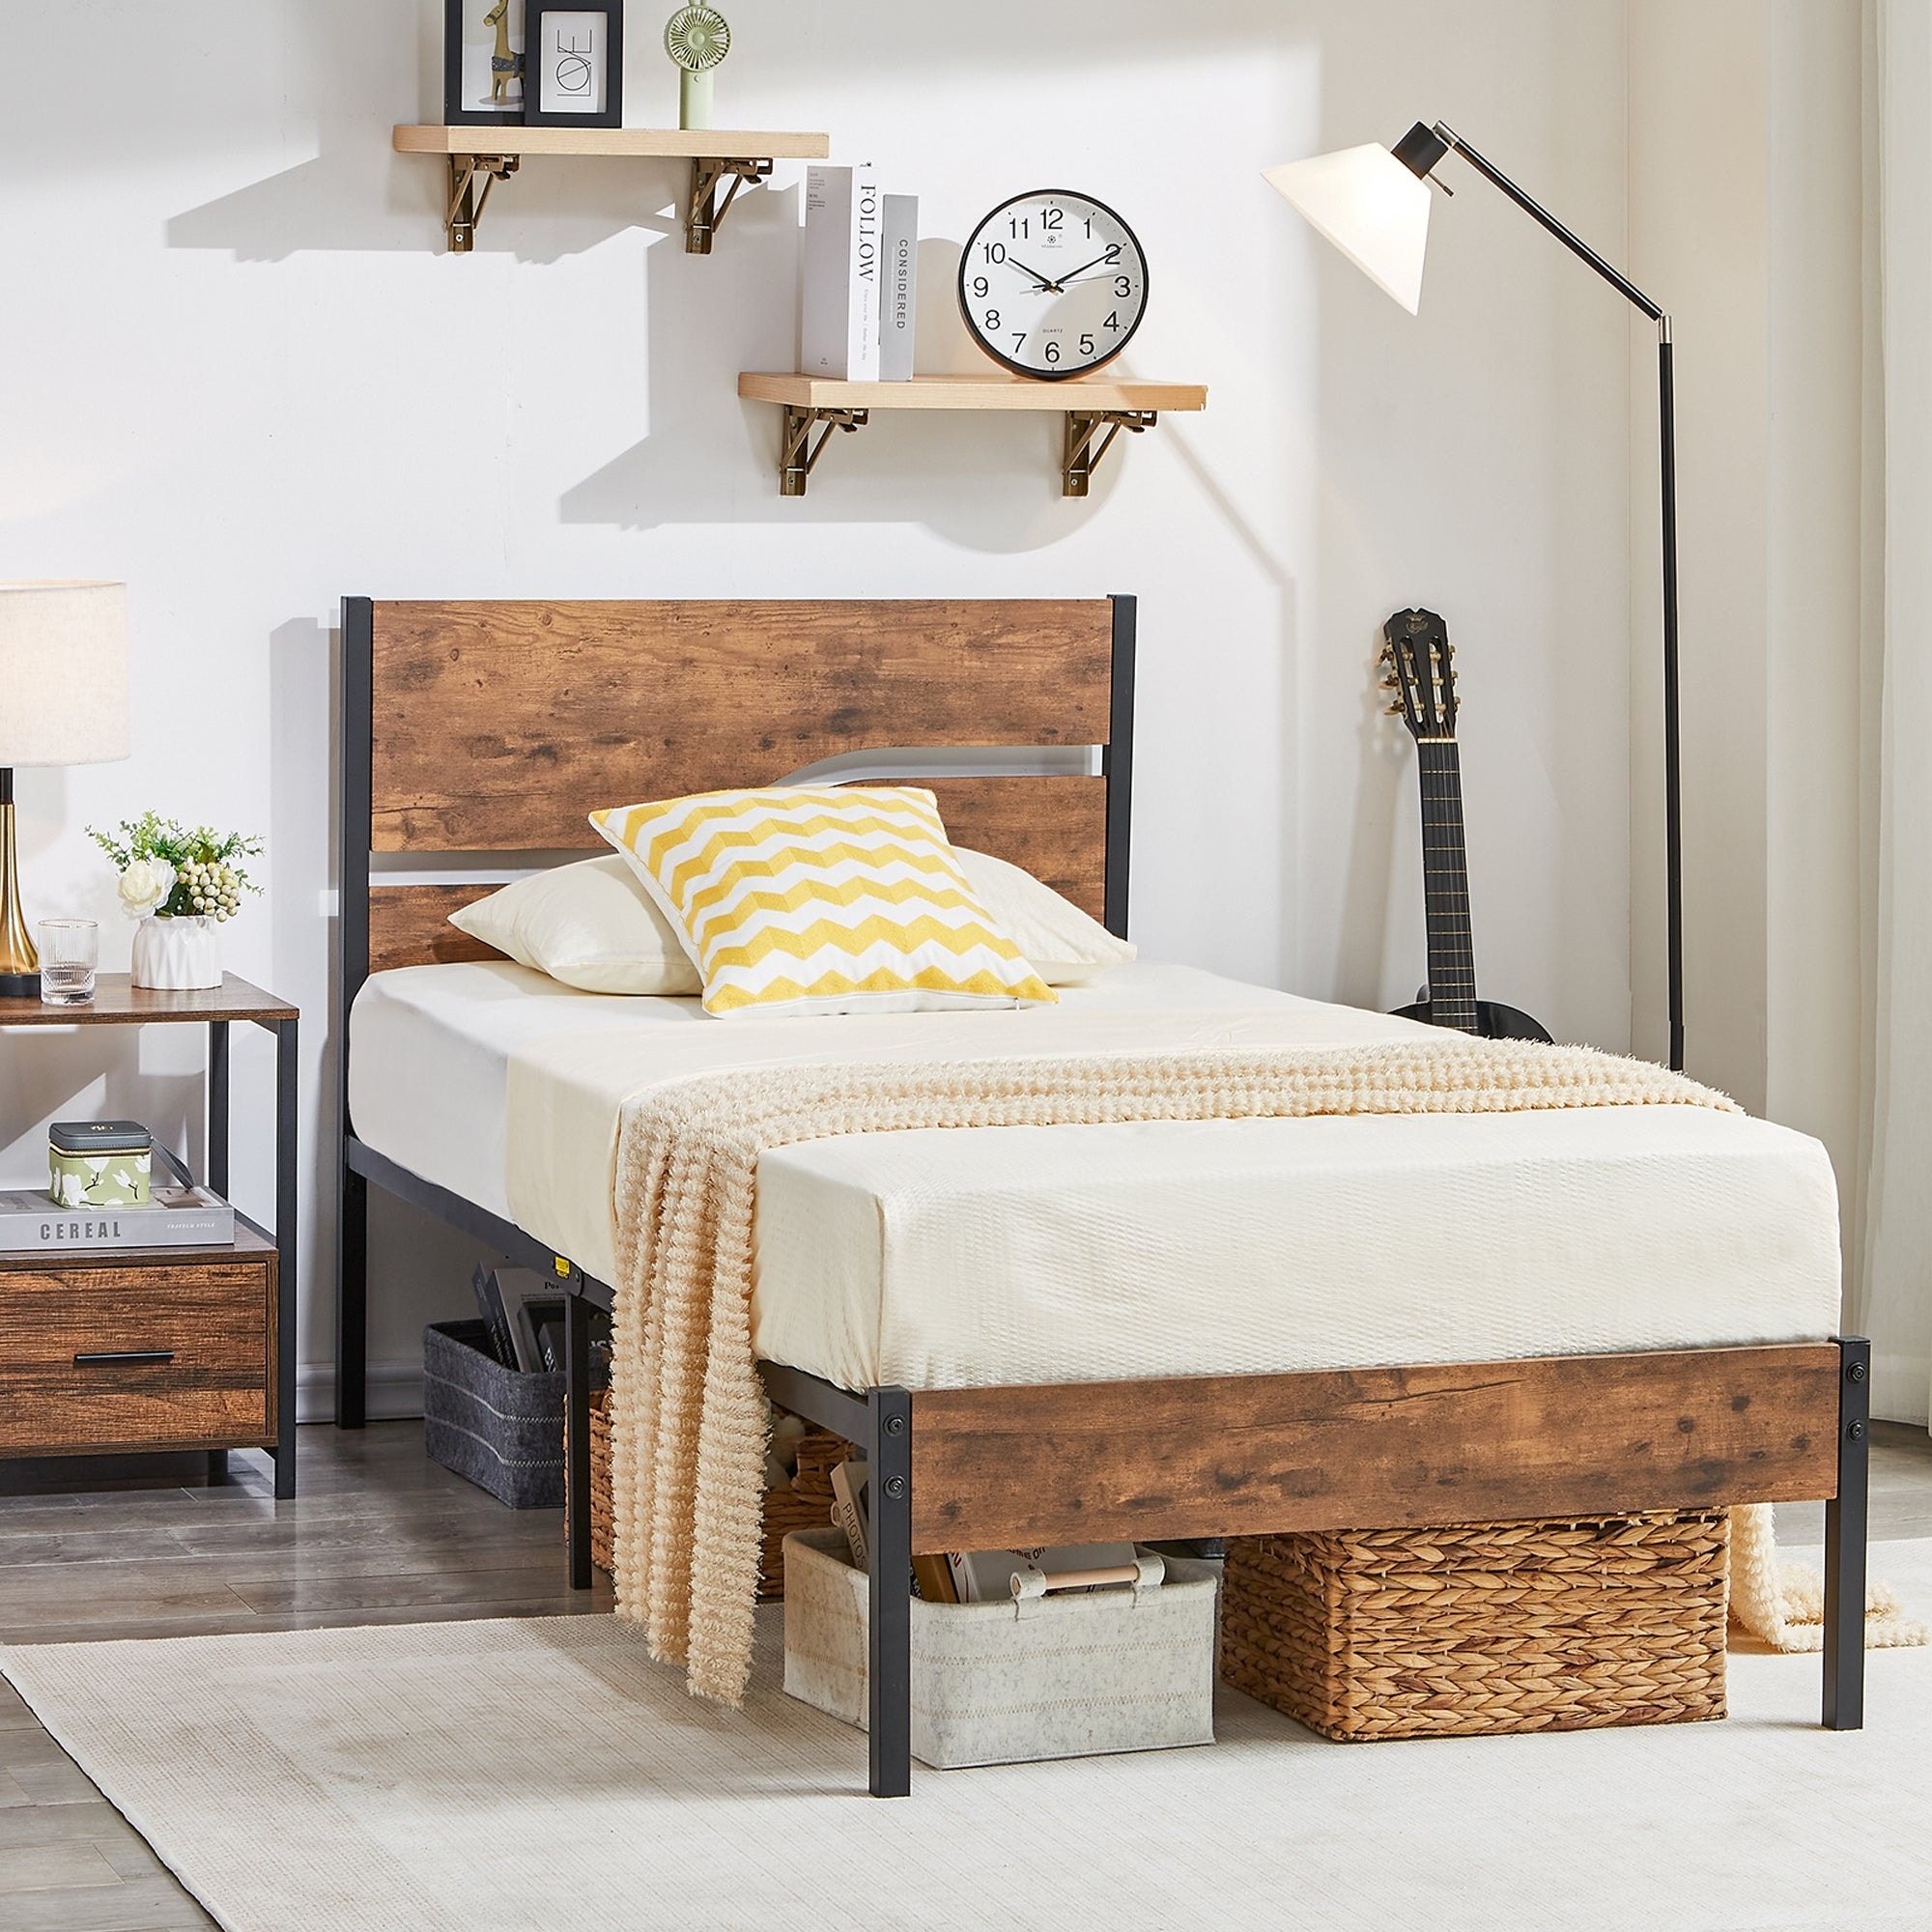 https://ak1.ostkcdn.com/images/products/is/images/direct/024d76d5f69d7ffa2298ad67de915964b359cc13/VECELO-Queen-Size-Bed-Industrial-Platform-Bed-Frame-with-Wood-Headboard%2CEasy-Set-up.jpg